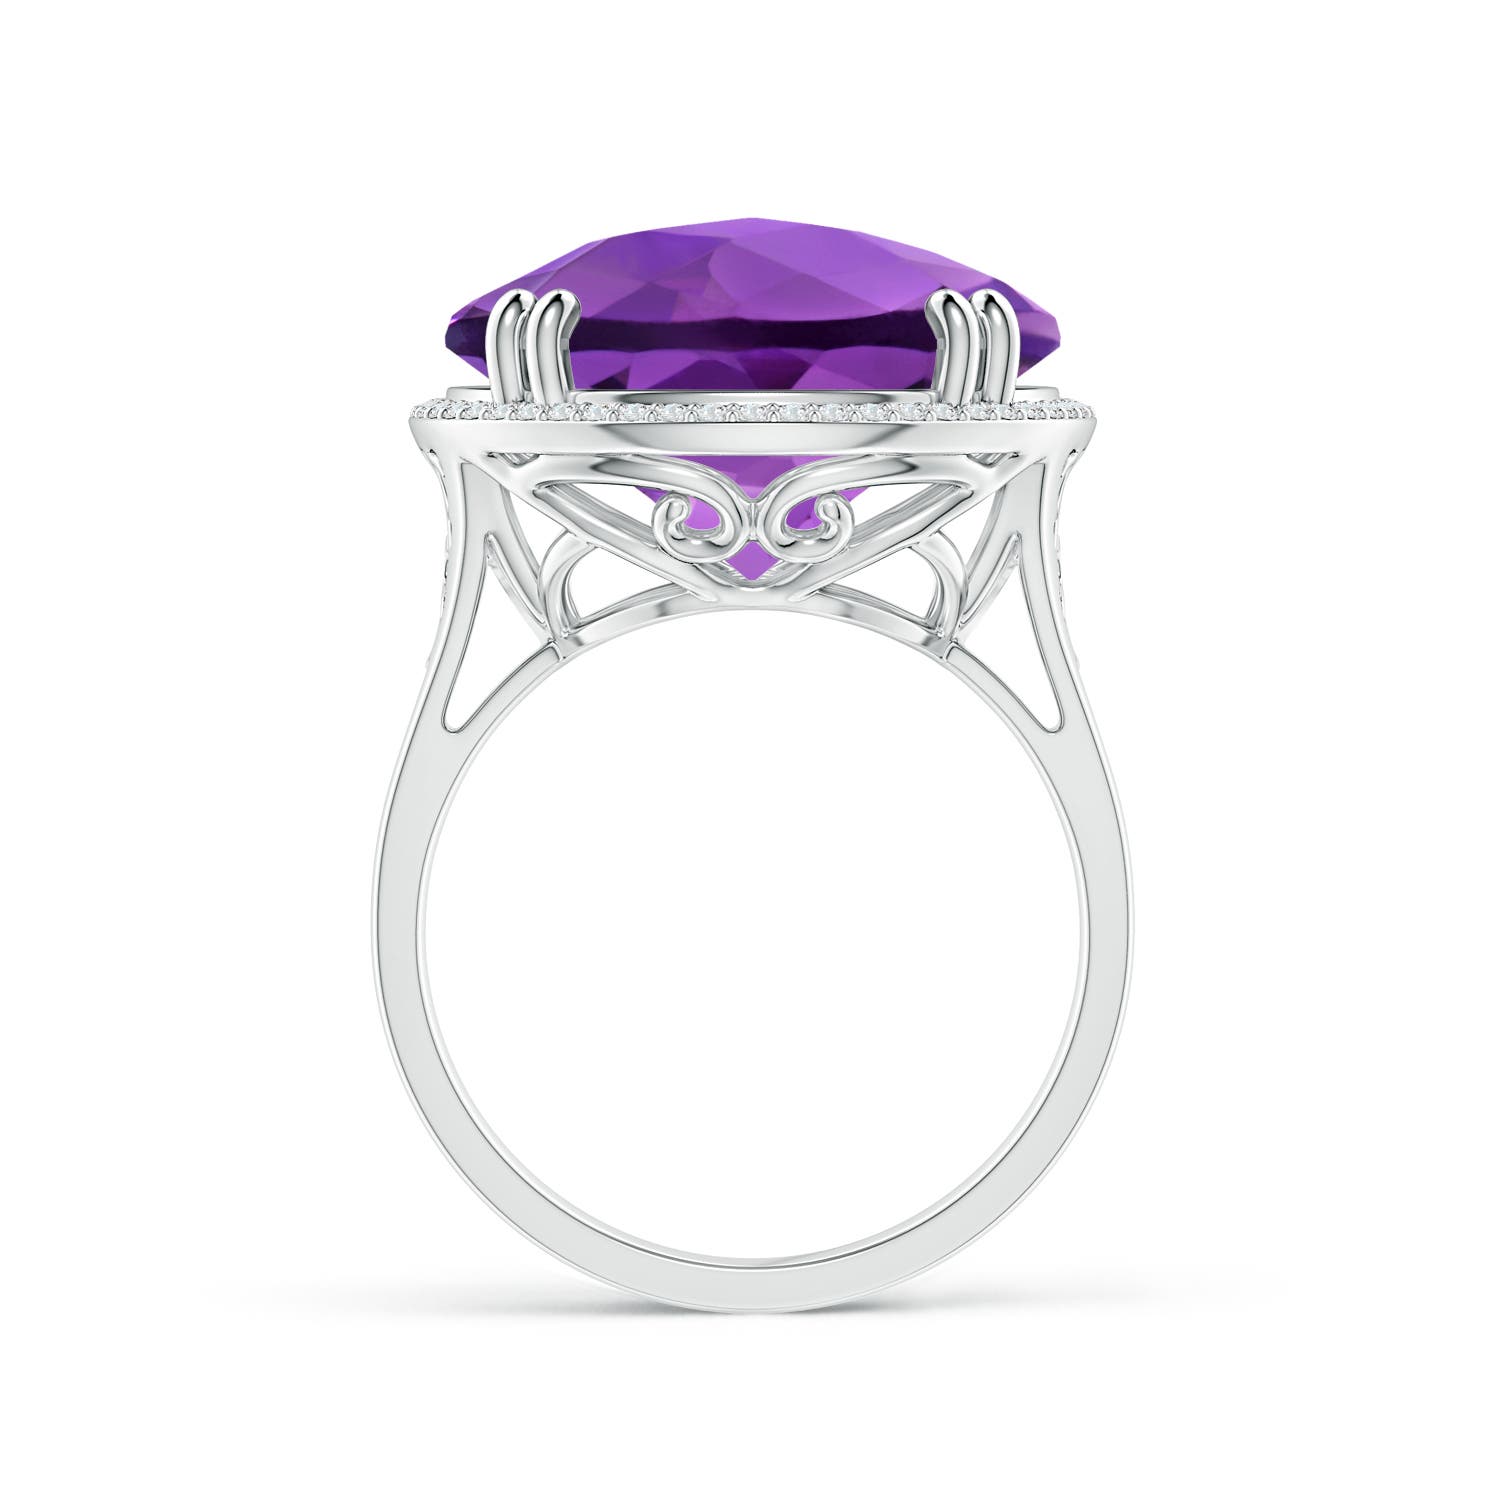 AA - Amethyst / 15.18 CT / 14 KT White Gold